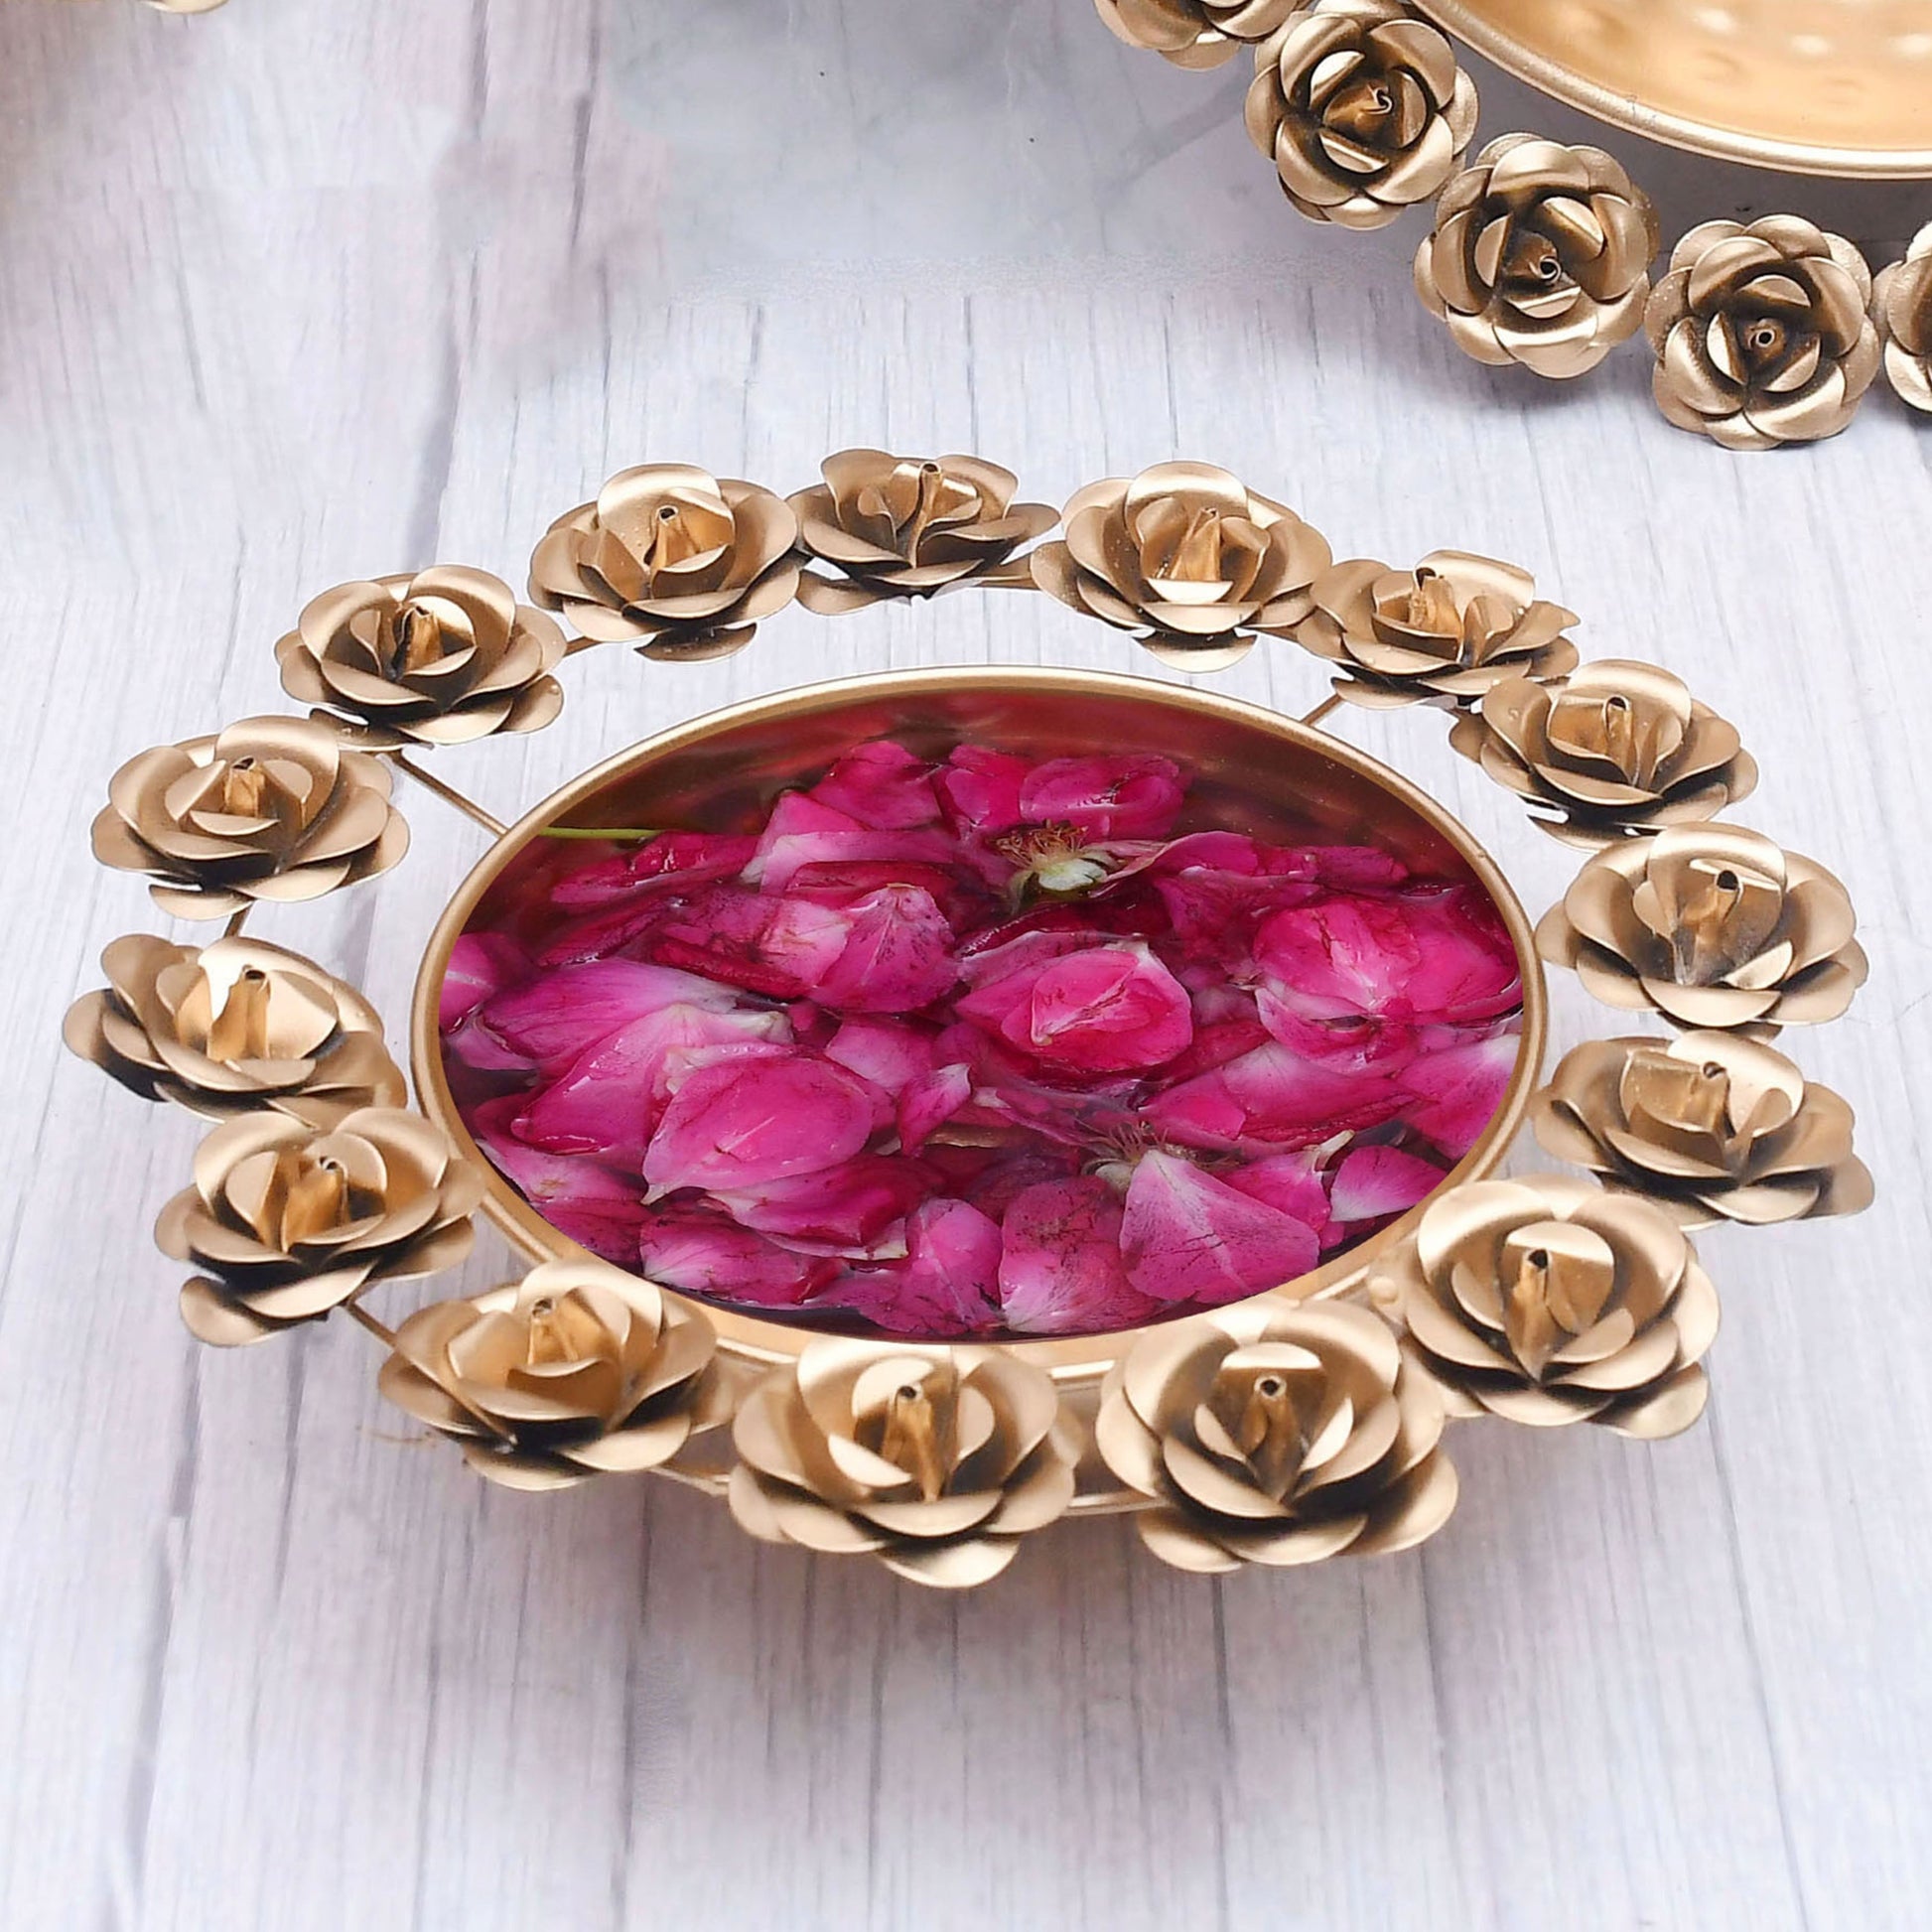 SAMA Homes - exclusive metal rose design urli bowl for home decor for floating flowers and candles